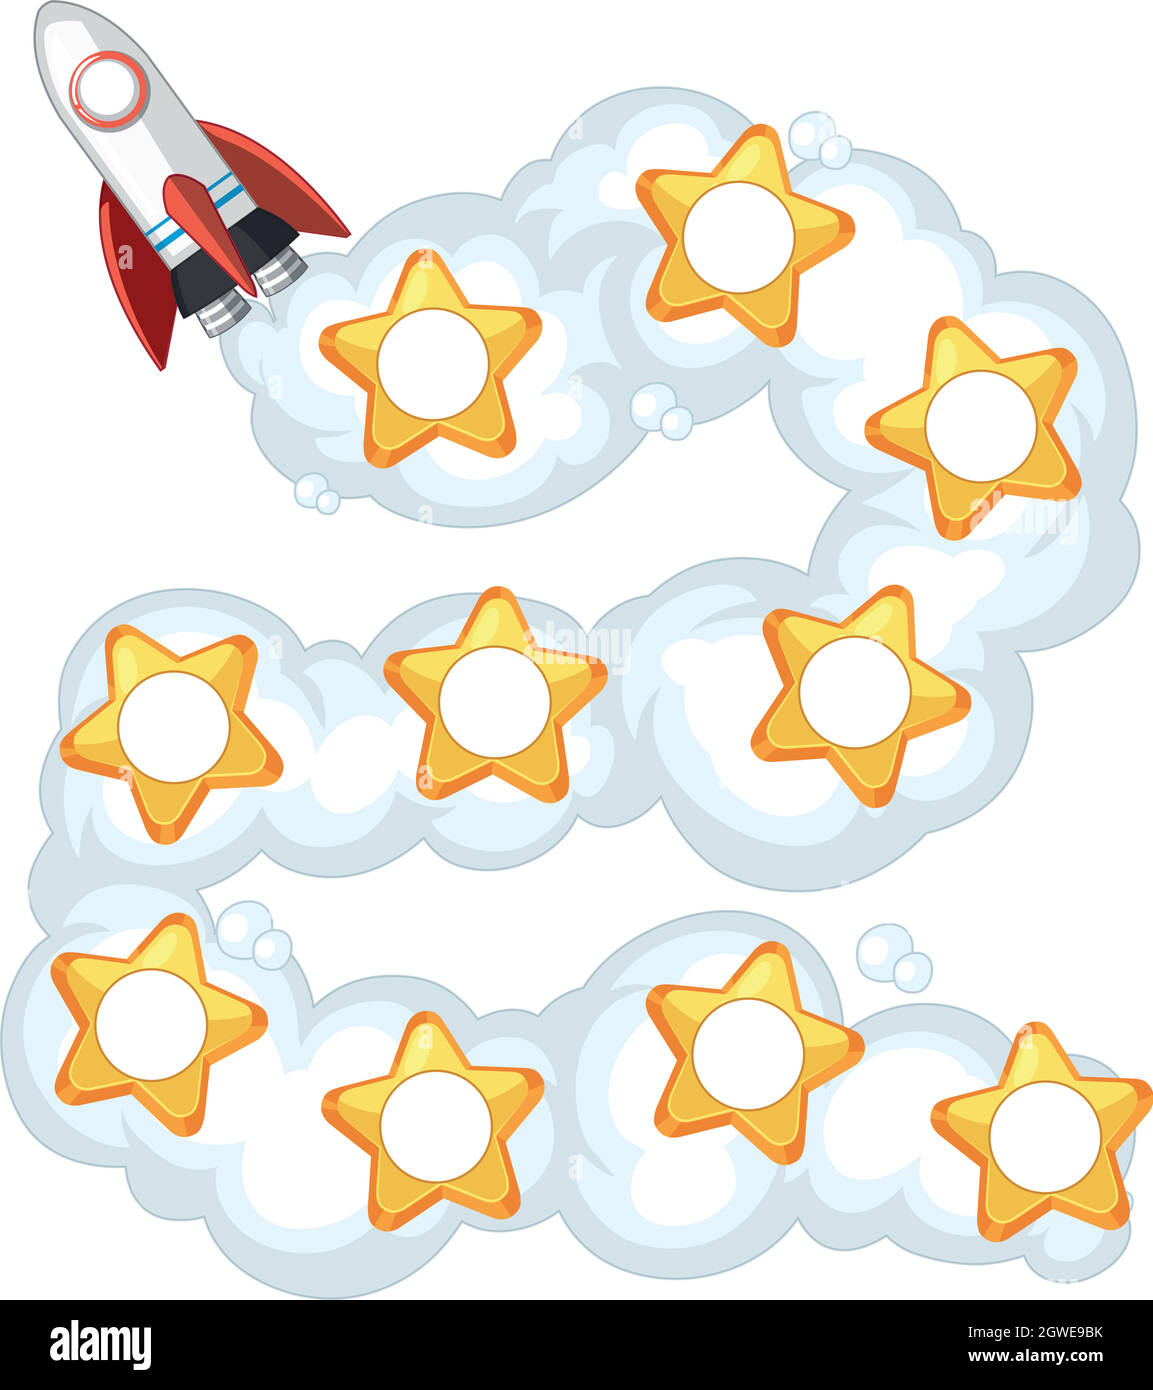 Rocket and stars in a daisy chain format for maths or worksheet Stock Vector